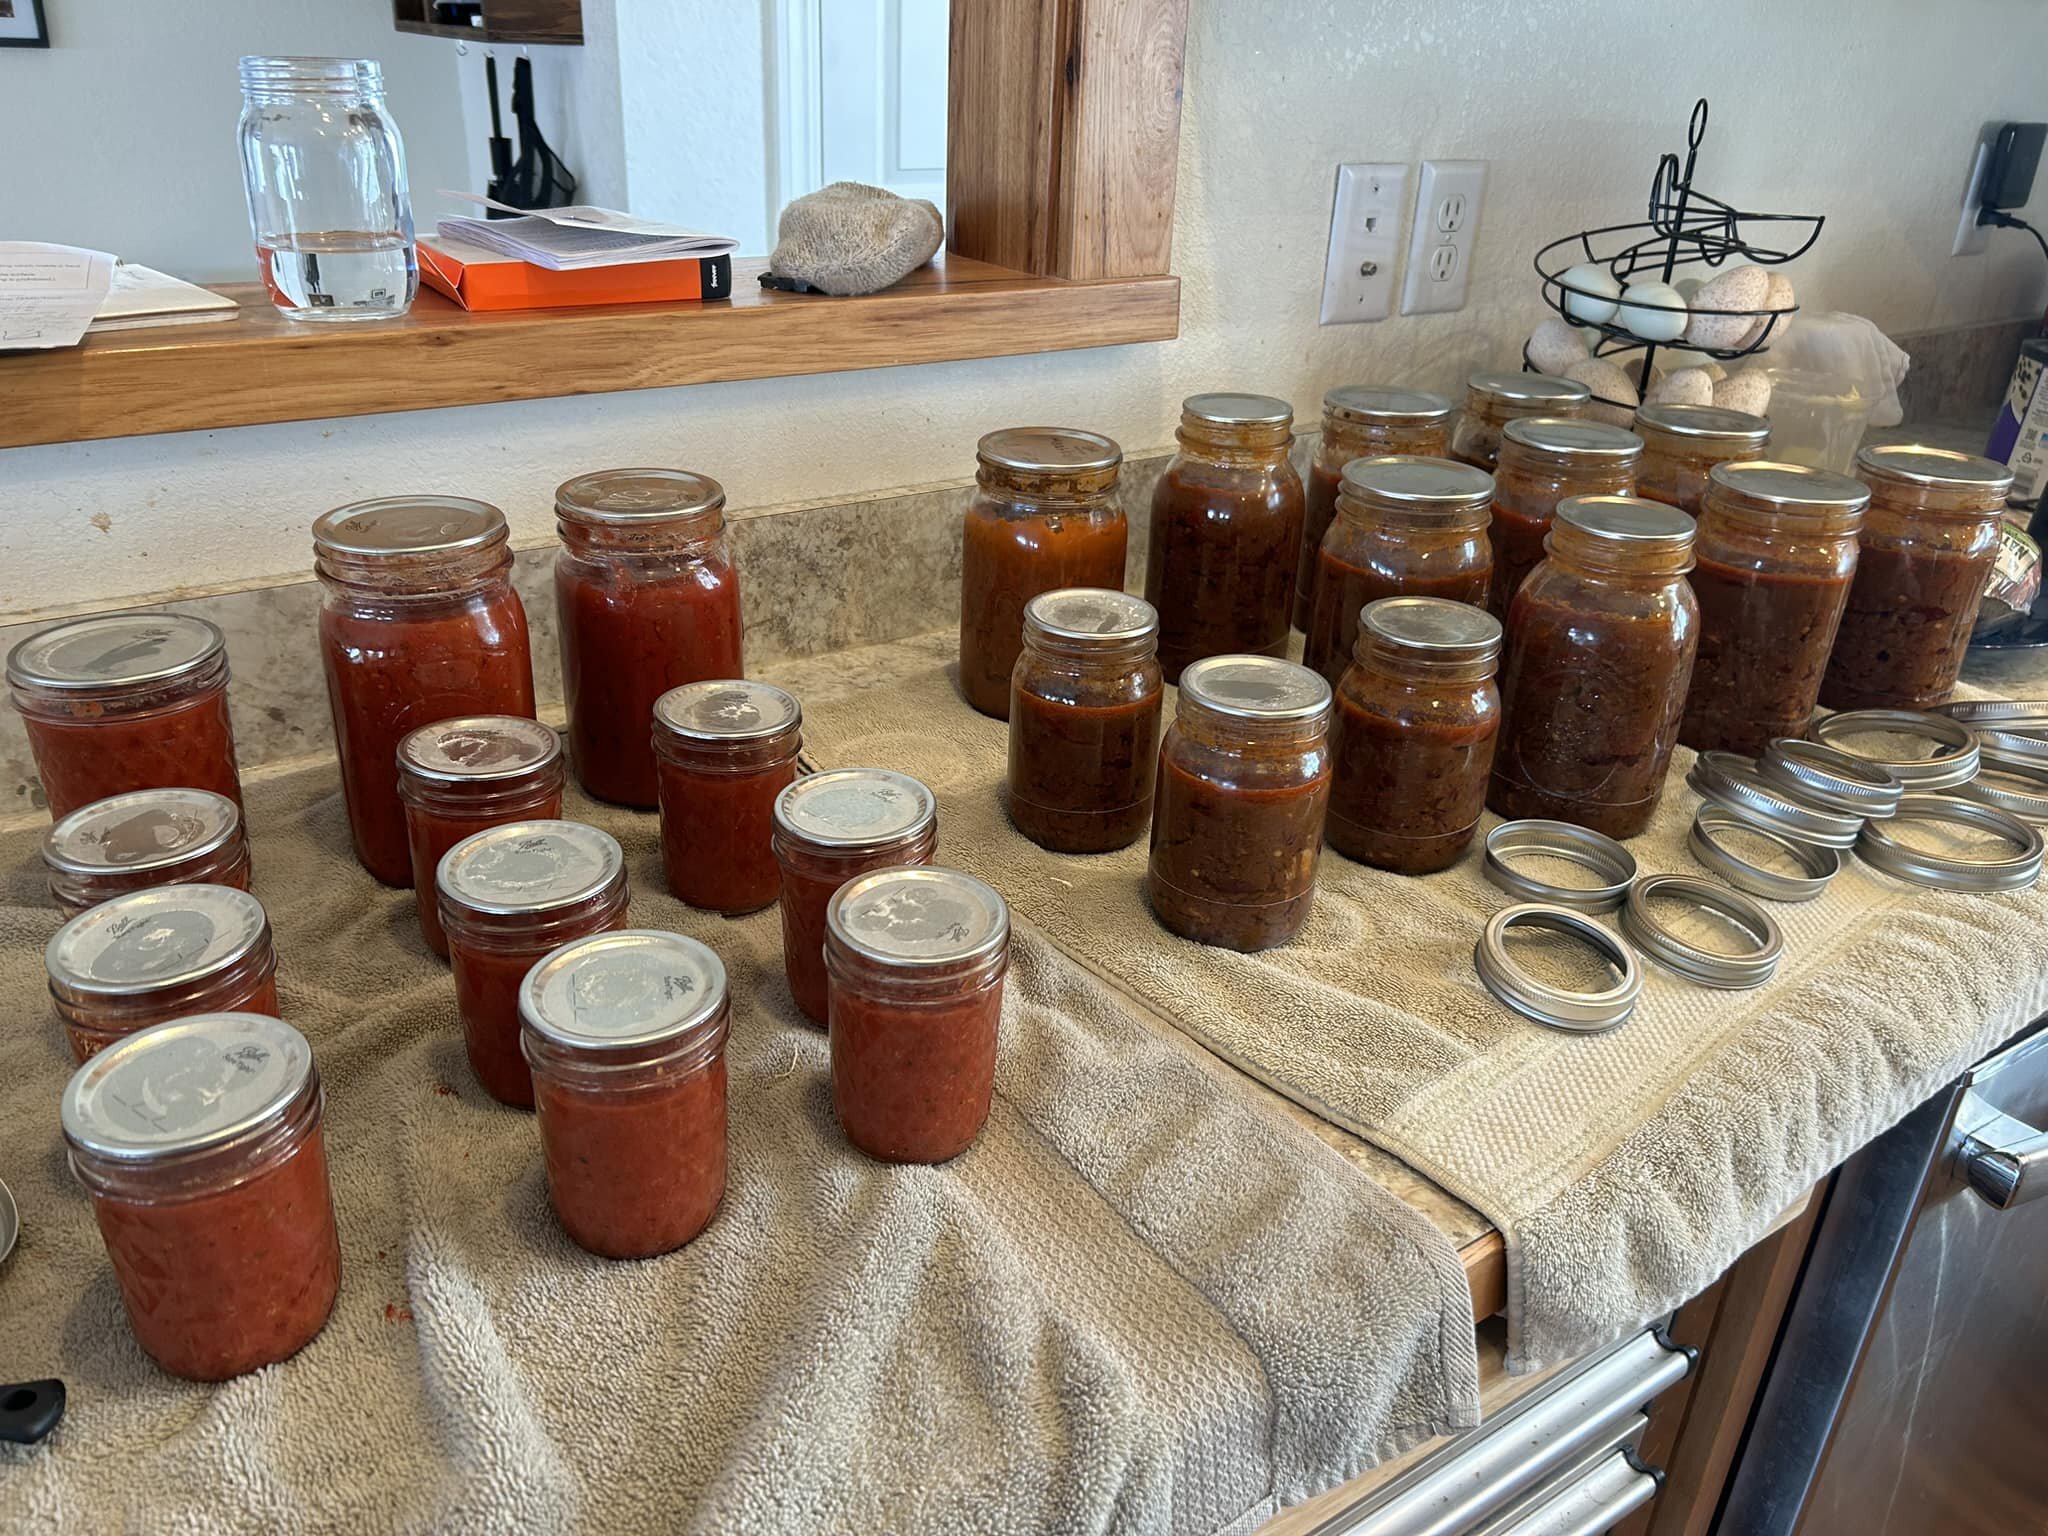 Mandy Stephens successful canning day yesterday. Chili and pasta sauce.